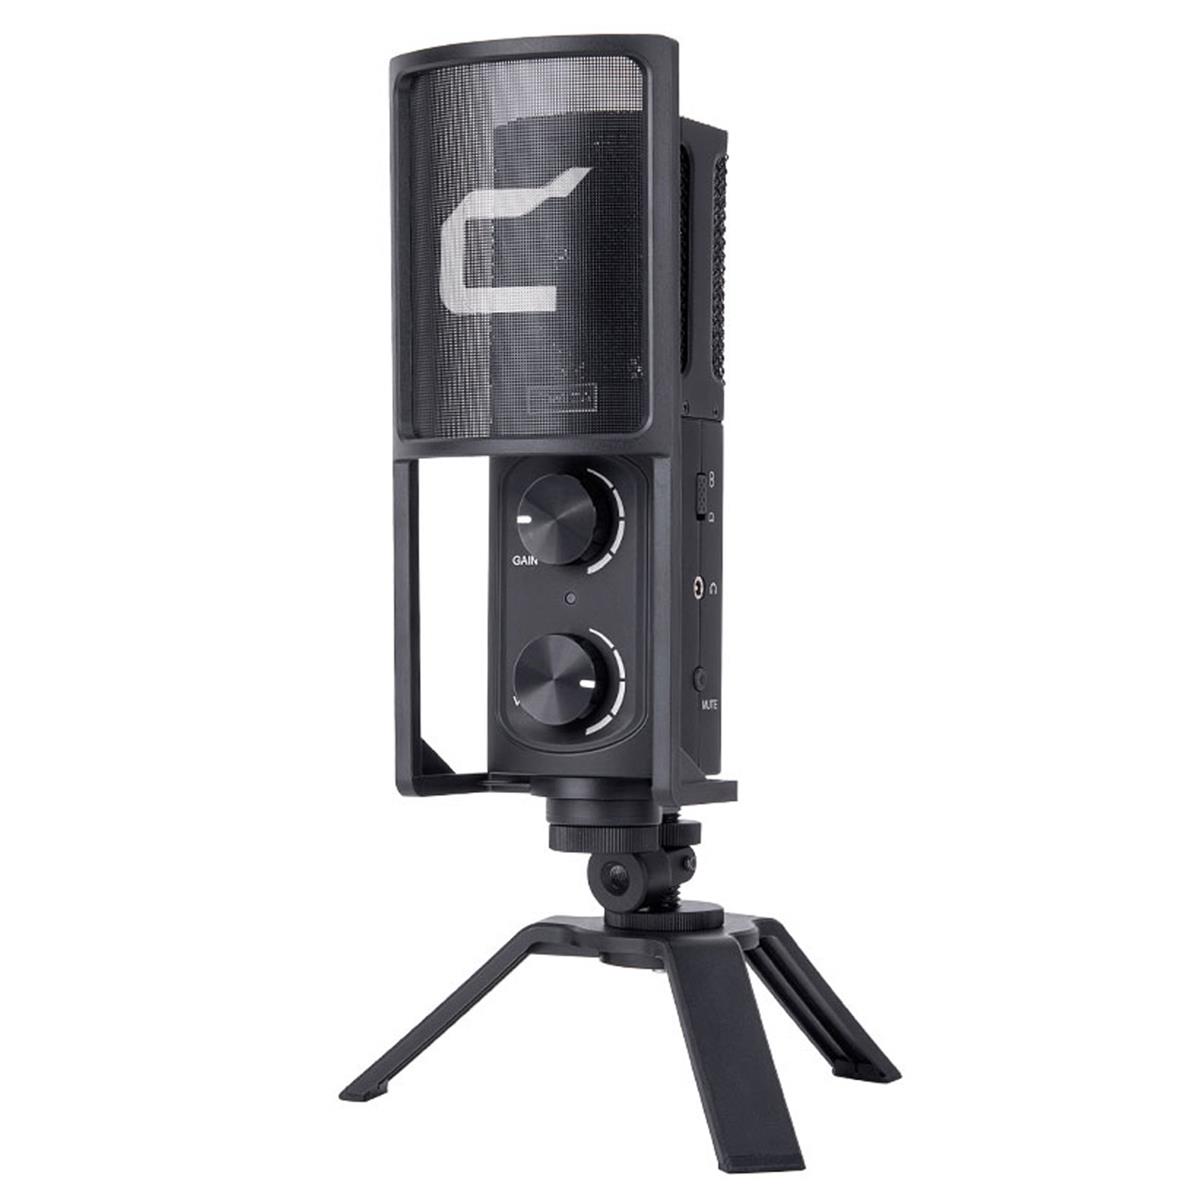 Image of Comica STM-USB Condenser Cardioid Microphone for Windows